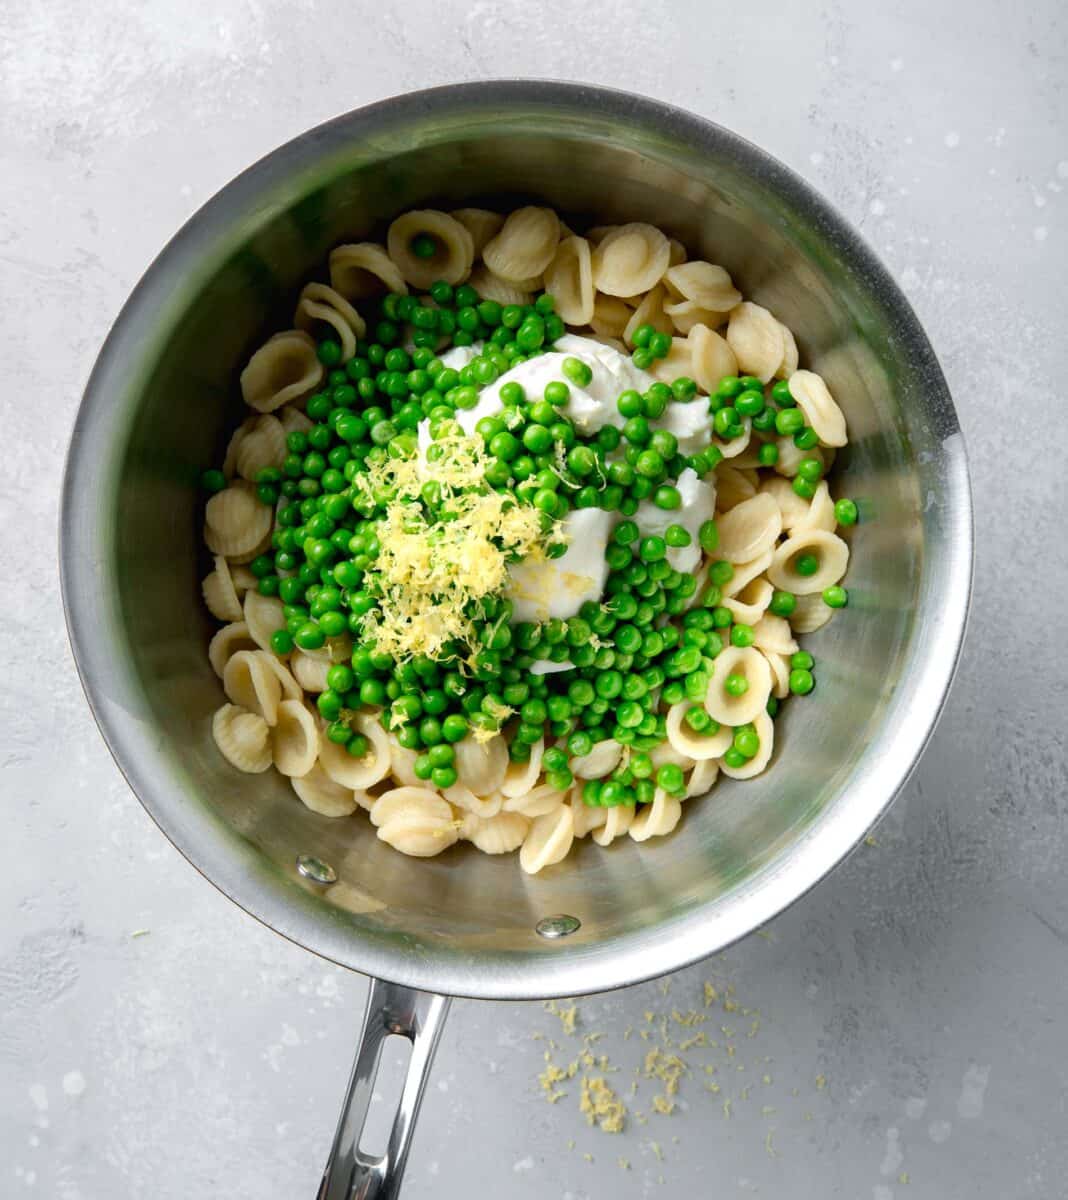 peas and lemon zest added on top of ricotta cheese and cooked pasta in a stainless steel pot